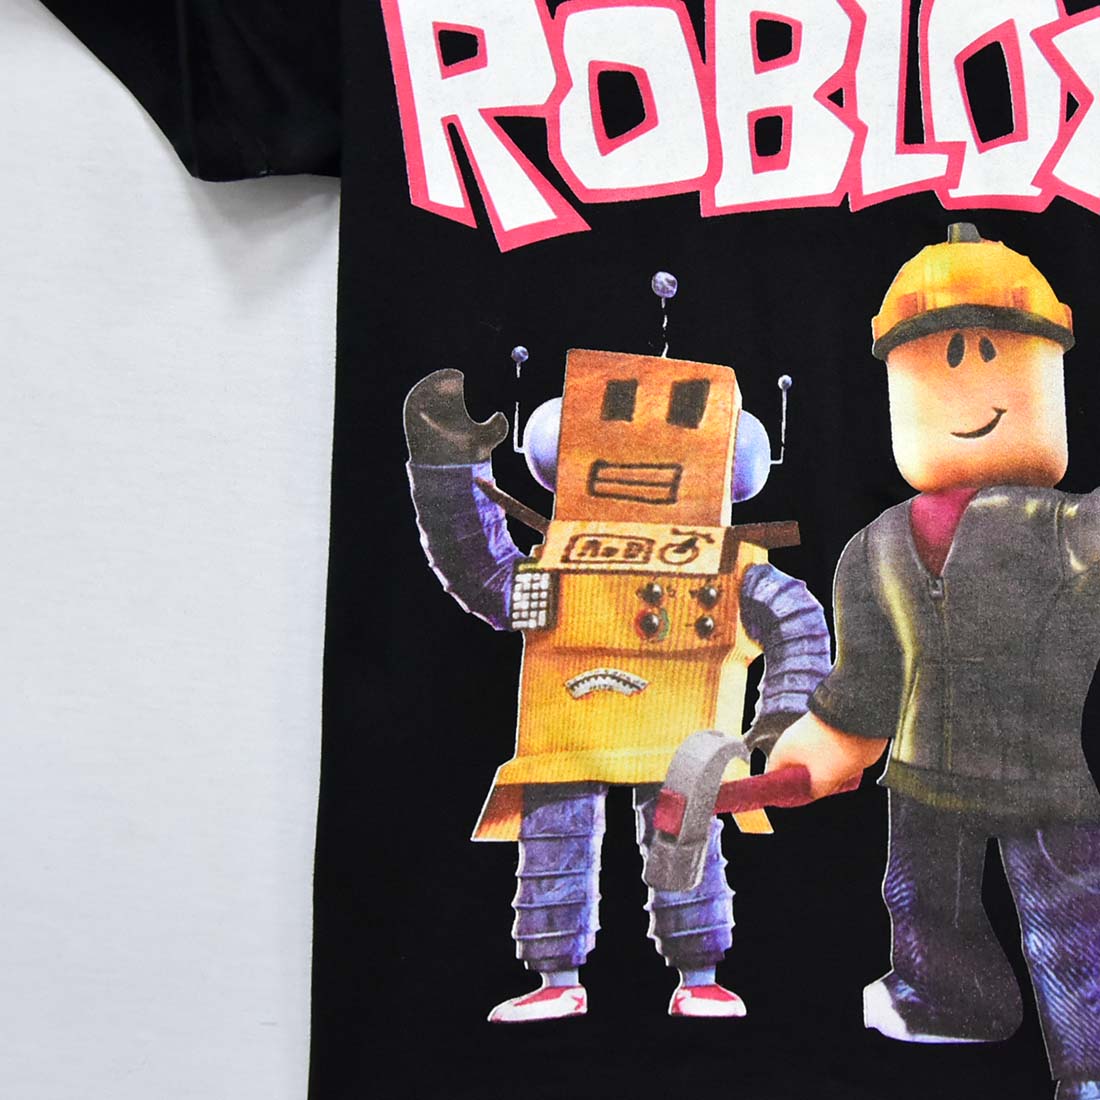 Roblox 2 Kid S Unisex T Shirt Size 6 12 Herse Clothing - details about boys roblox tee shirt size xl 1820 nwt